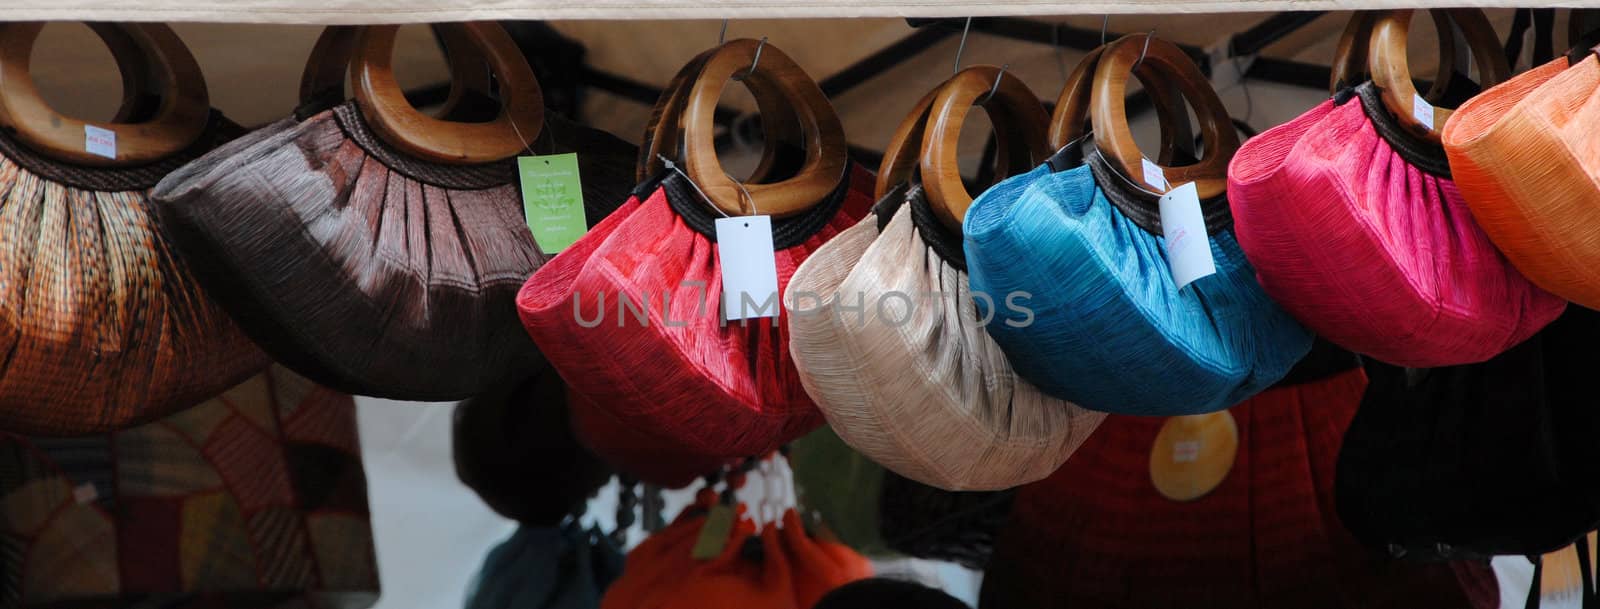 Hanging purses by northwoodsphoto